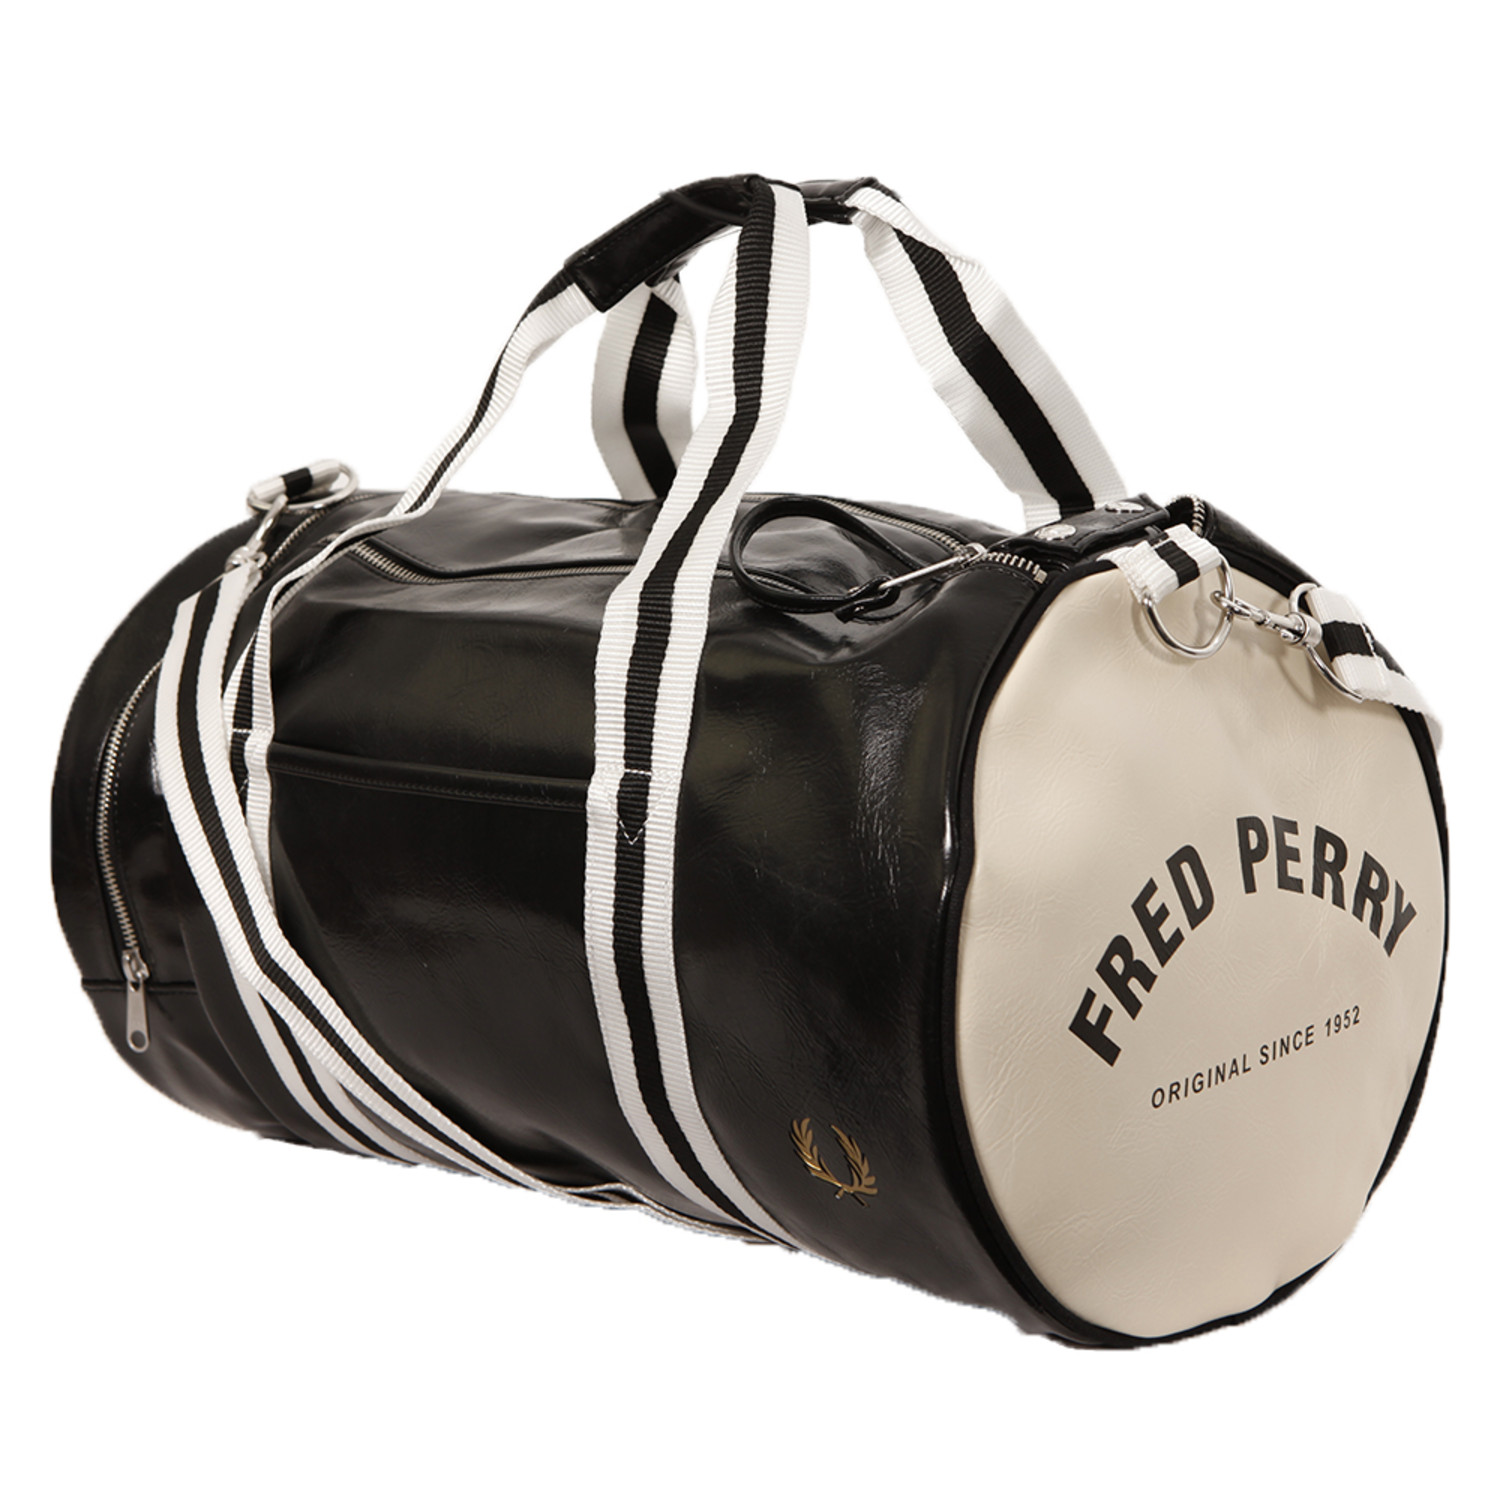 Sac Fred Perry Barrel - pour lui